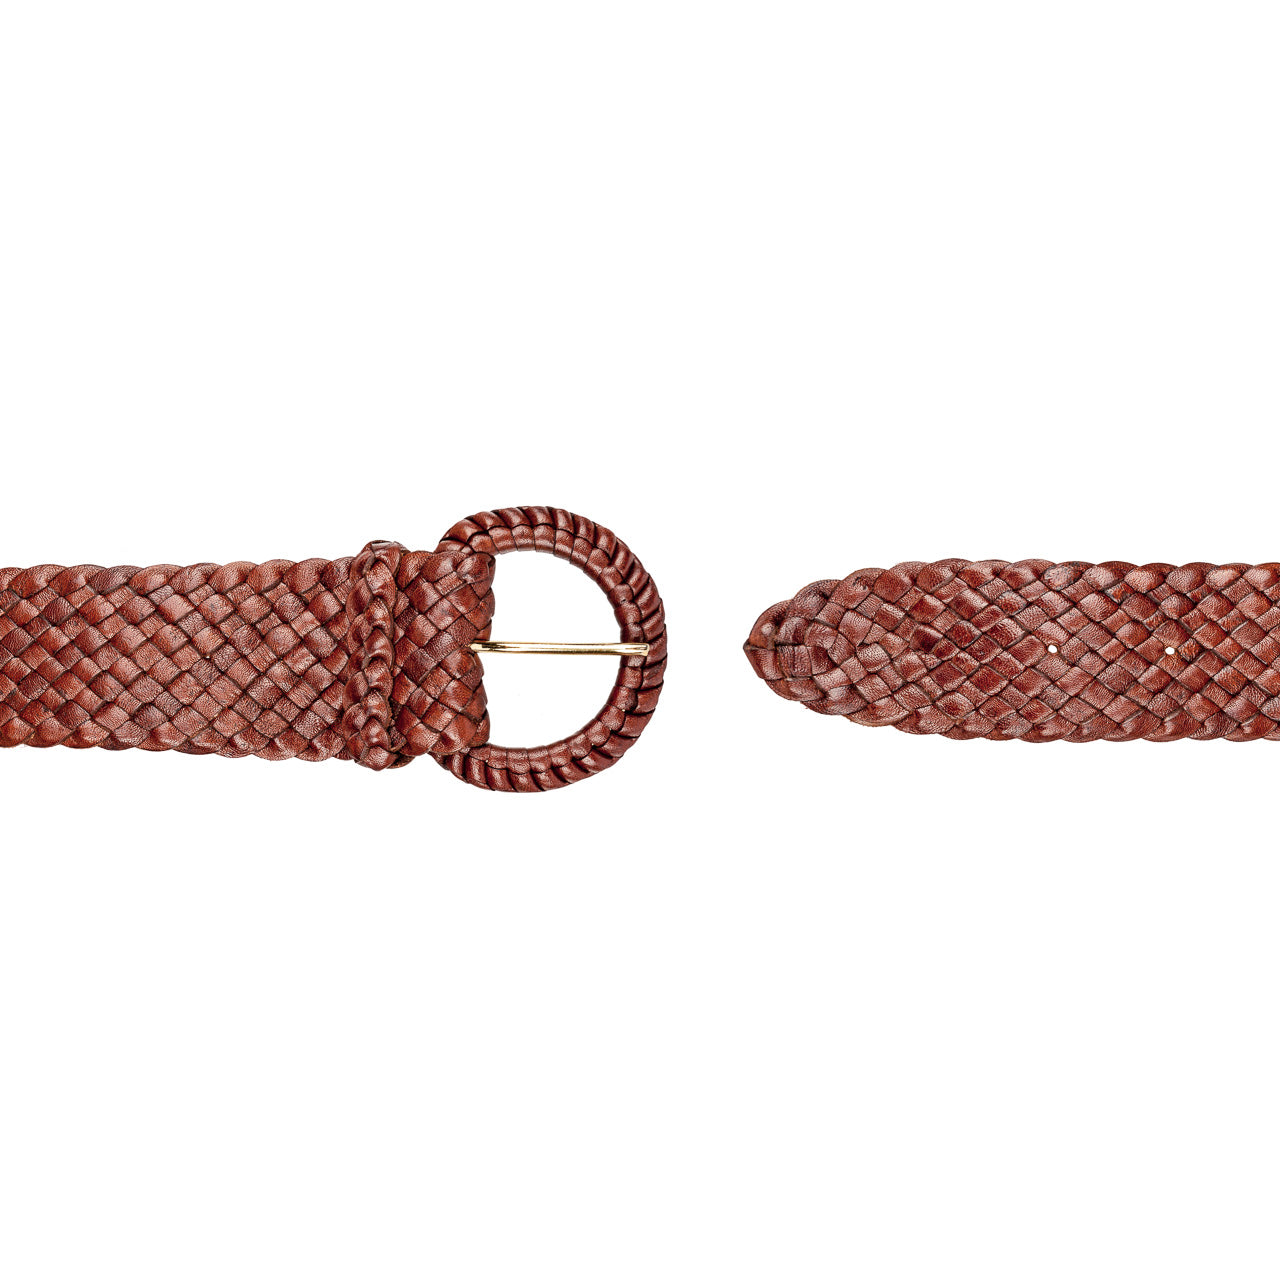 Tan Ladies Waratah belt, 43mm wide, statement piece. 12 strands of Kangaroo Leather in Brisbane. Perfect for jeans, durable for any occasion. Available Black, Tan.